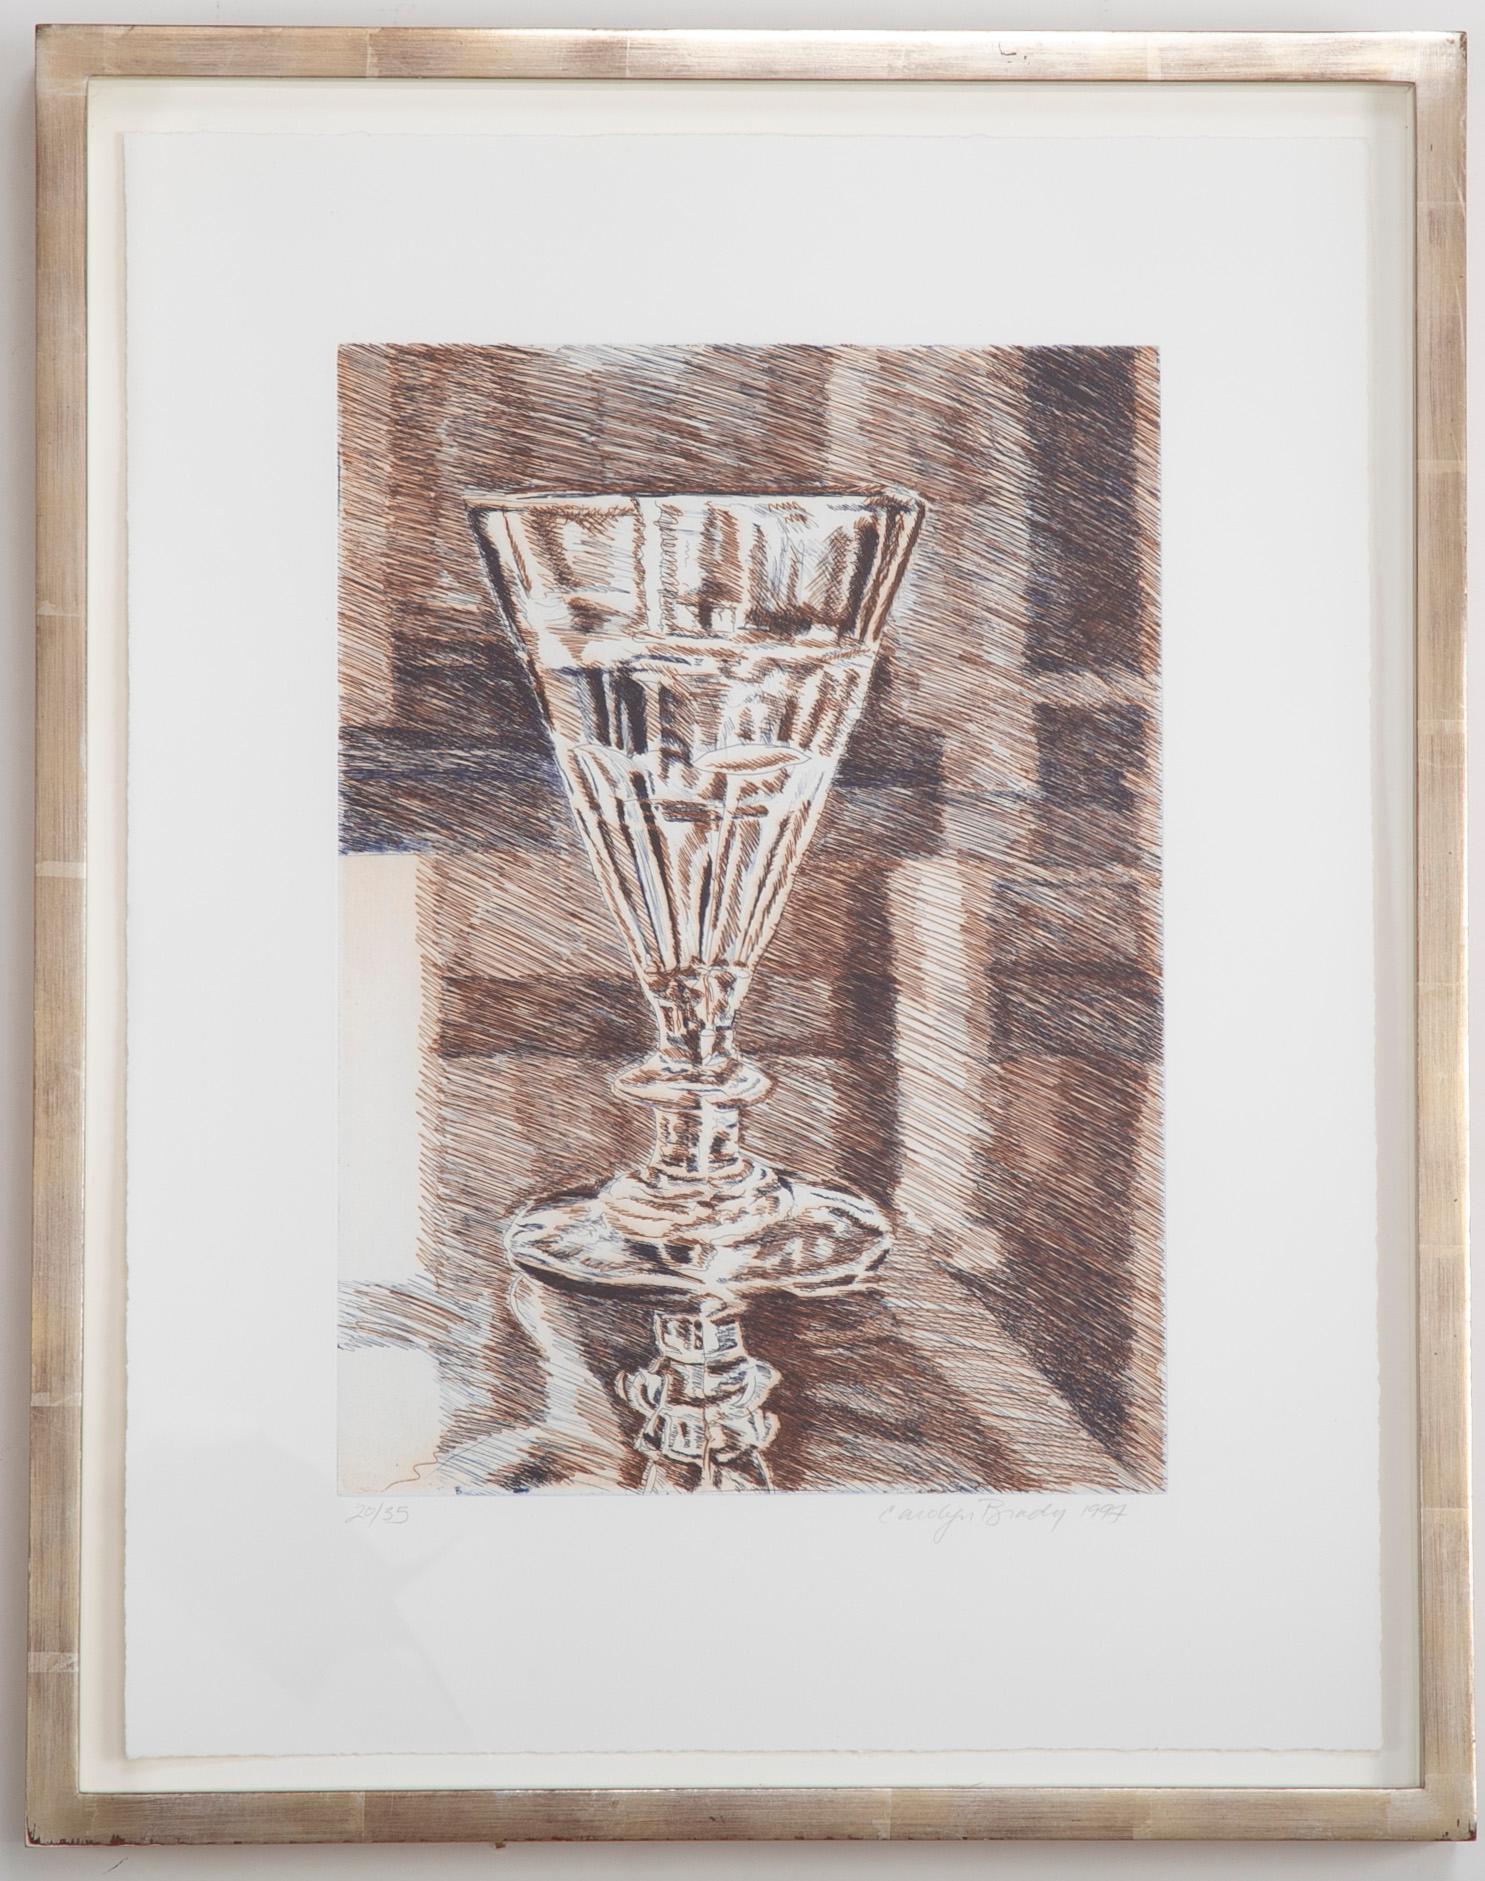 Carolyn Brady etching in browns of a water glass. Signed and numbered 20/35. Dated 1997.